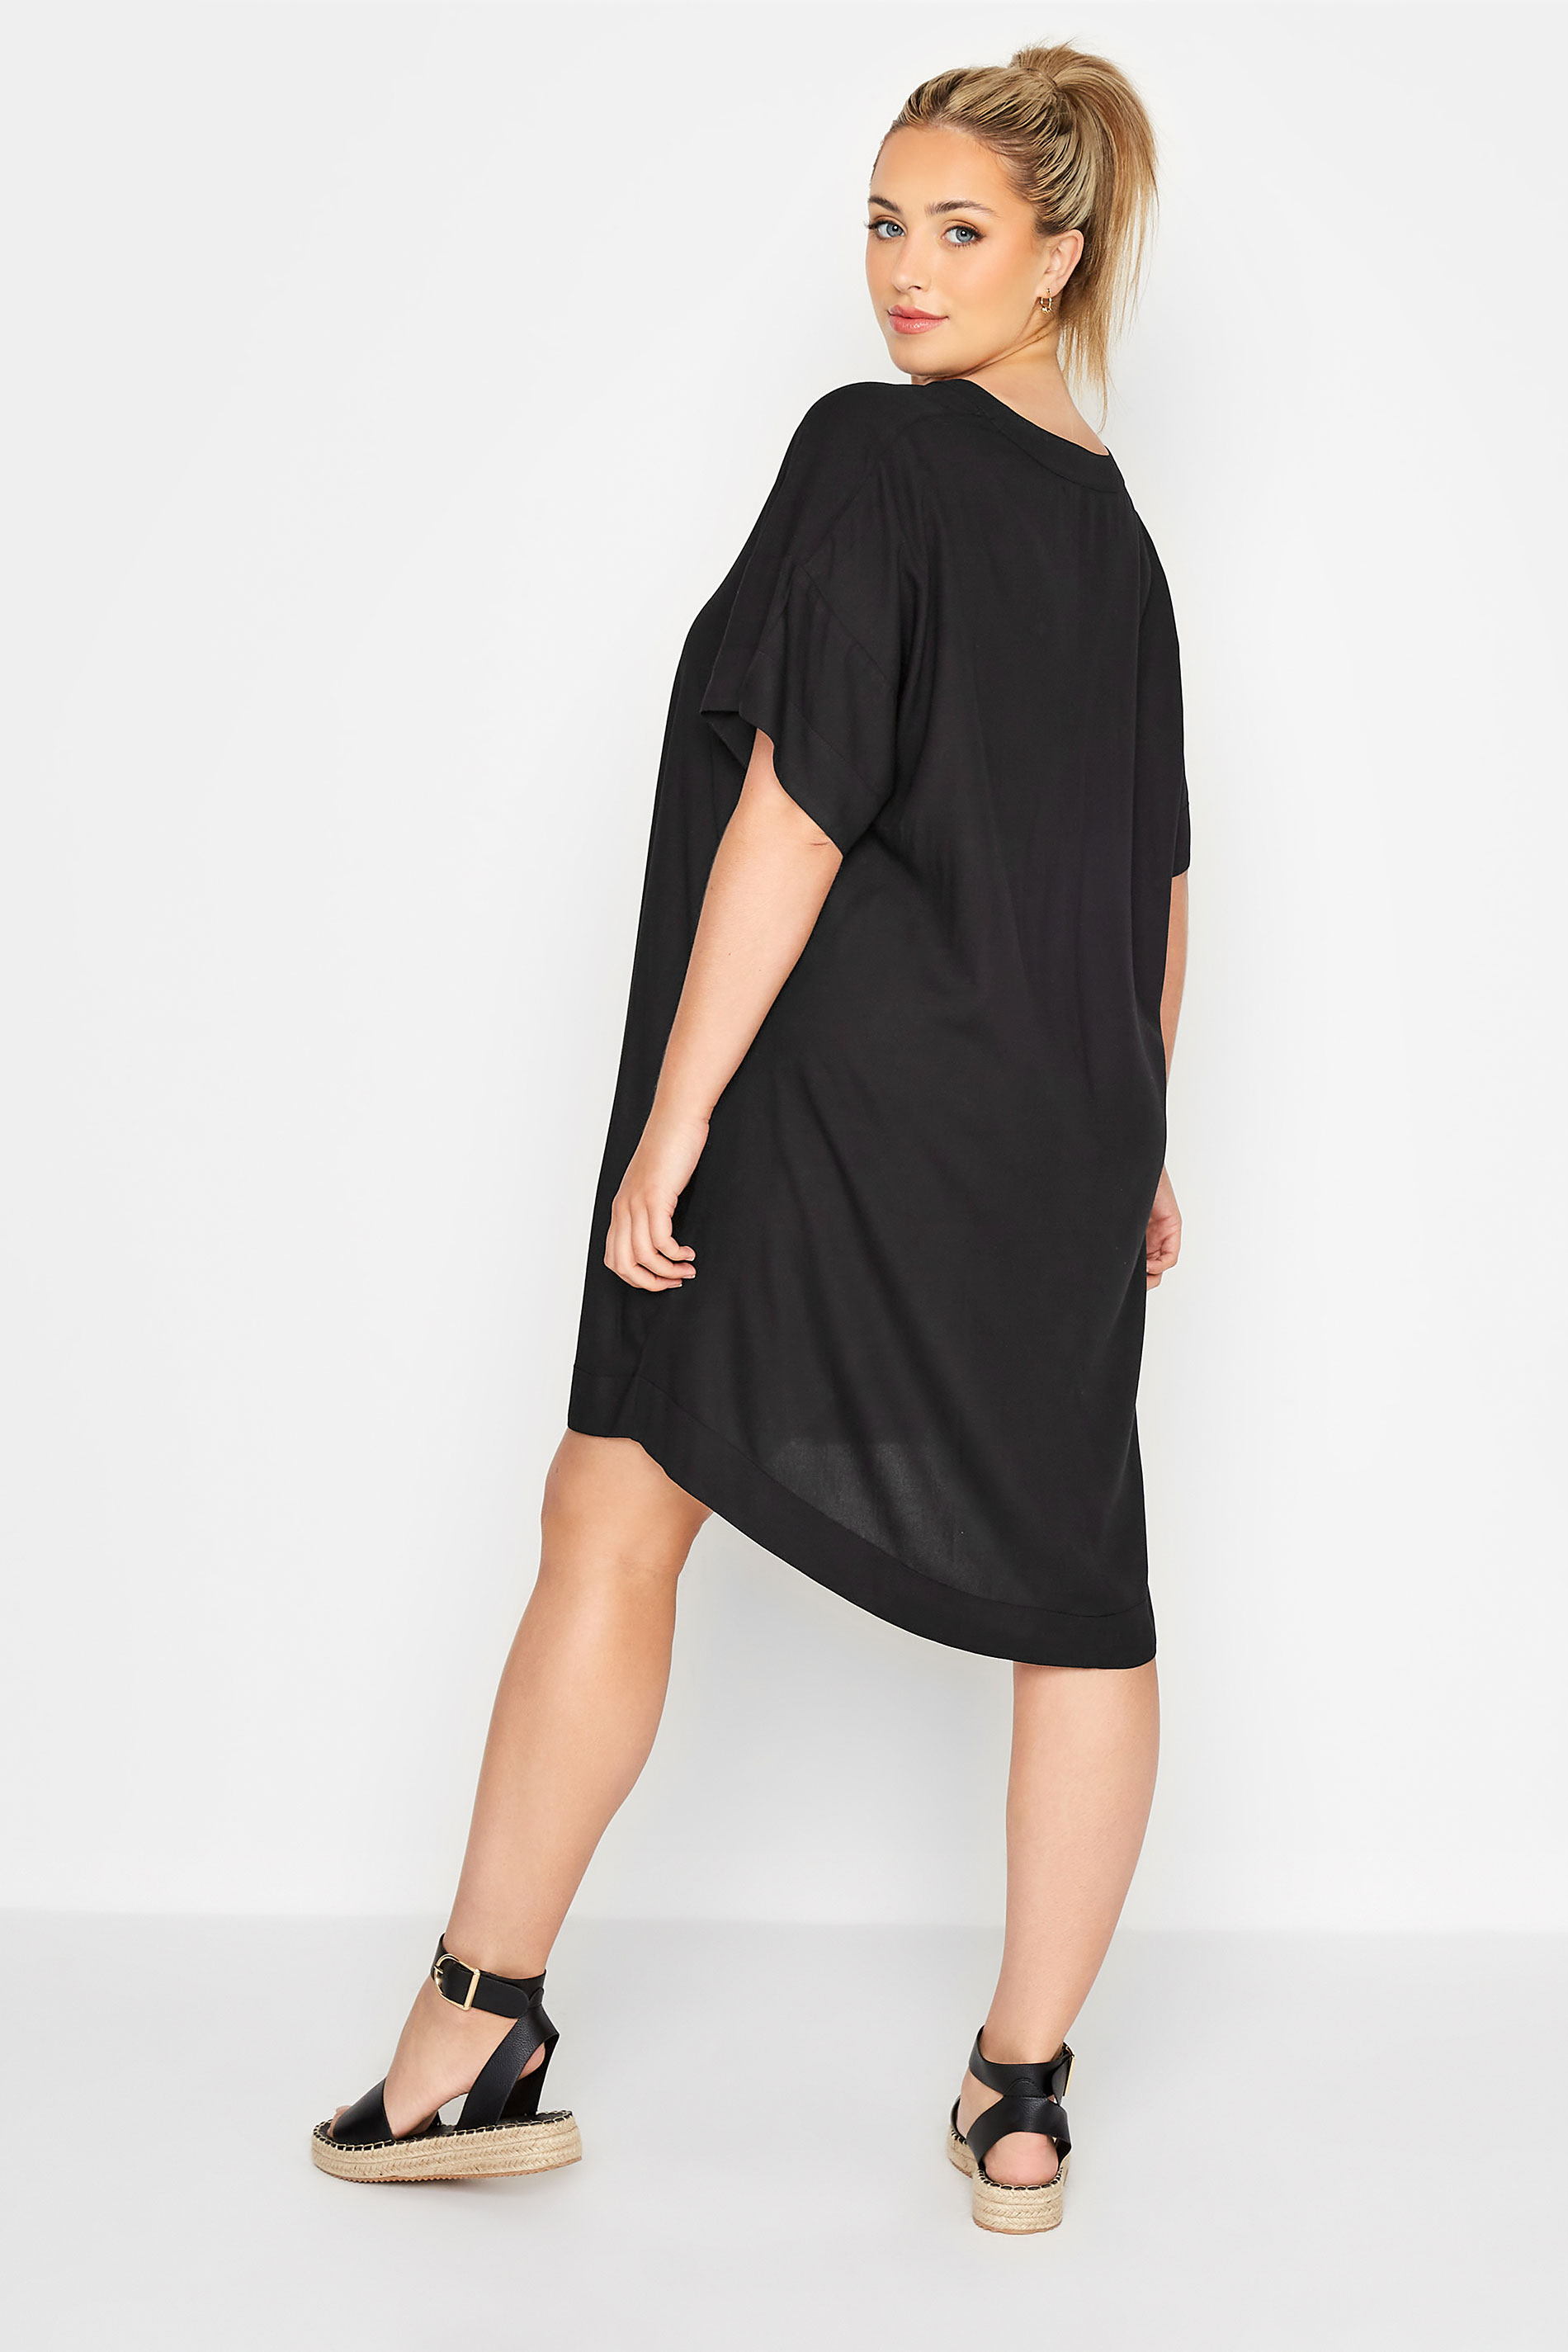 Robes Grande Taille Grande taille  Robes Casual | LIMITED COLLECTION - Robe Noire Style Chemisier - JM75091